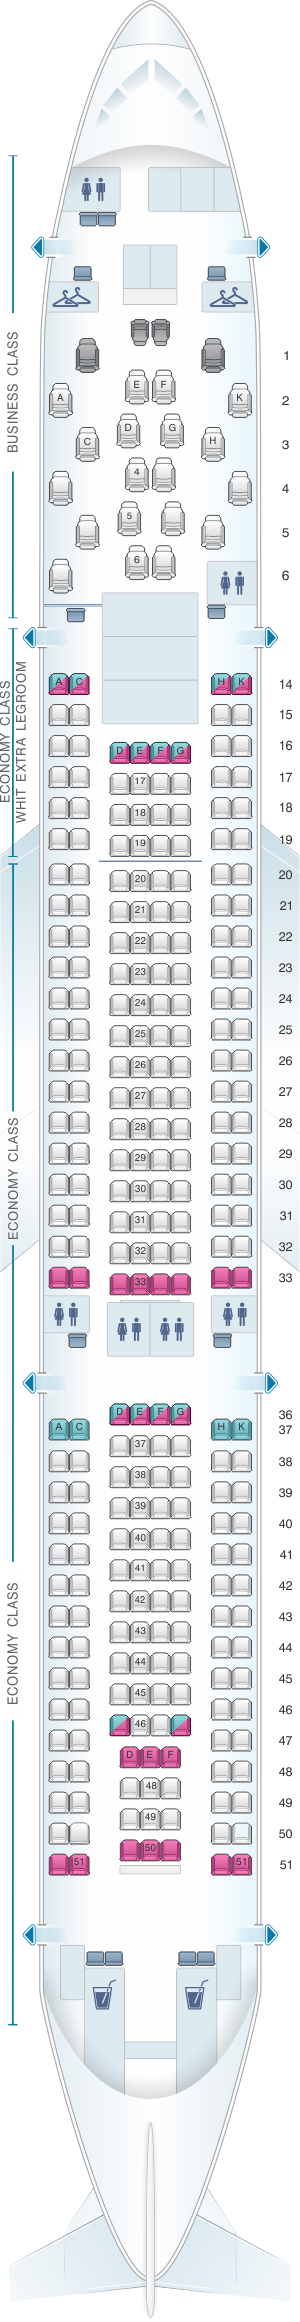 Seat map for Malaysia Airlines Airbus A330 200